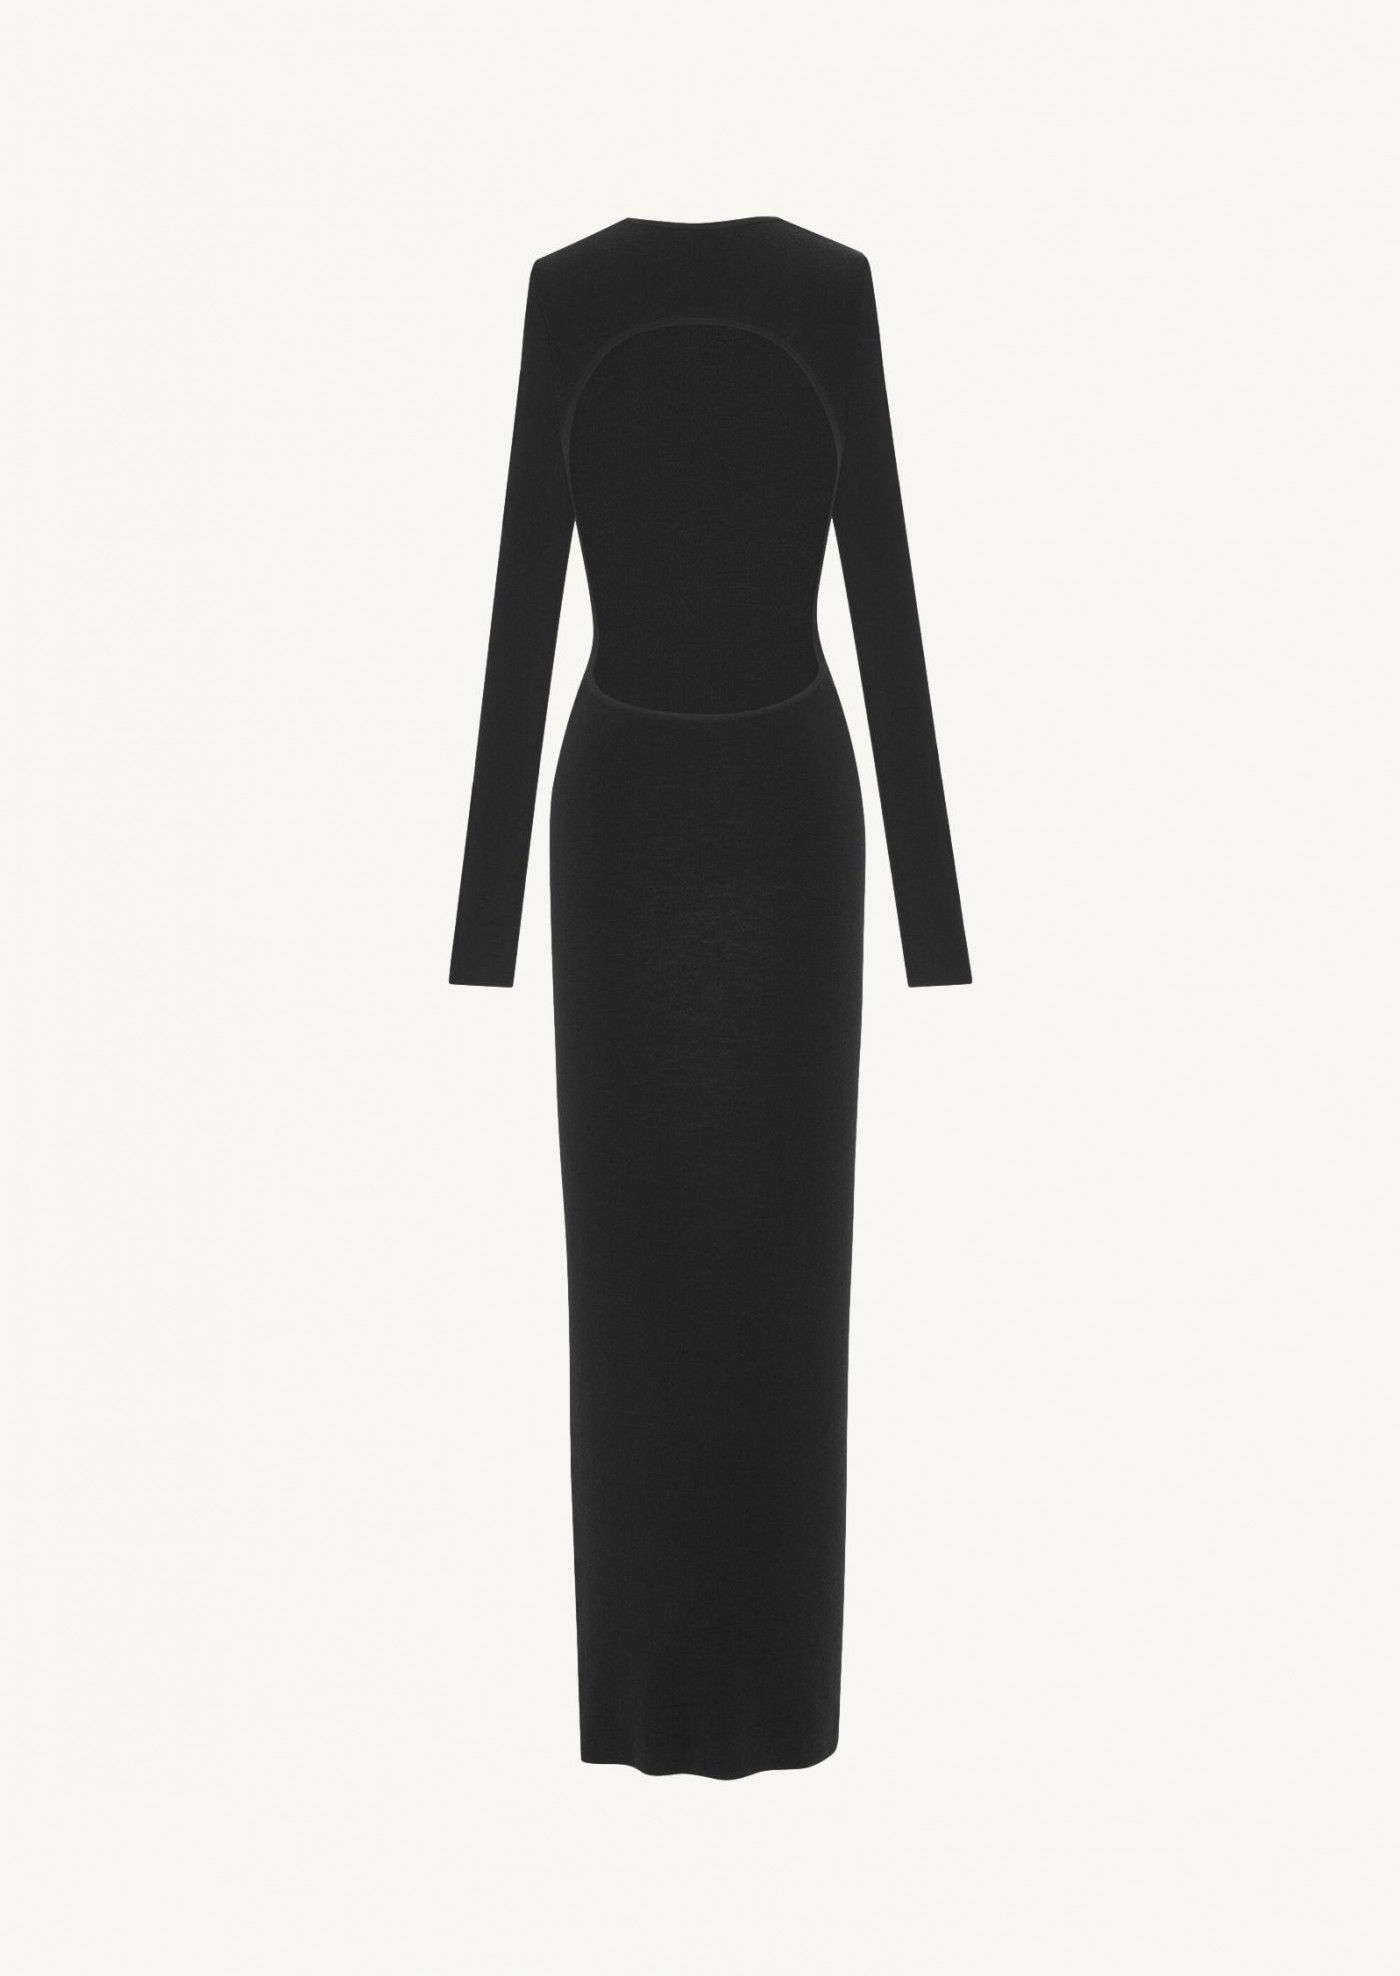 Dress with bare back in cashmere, wool and silk